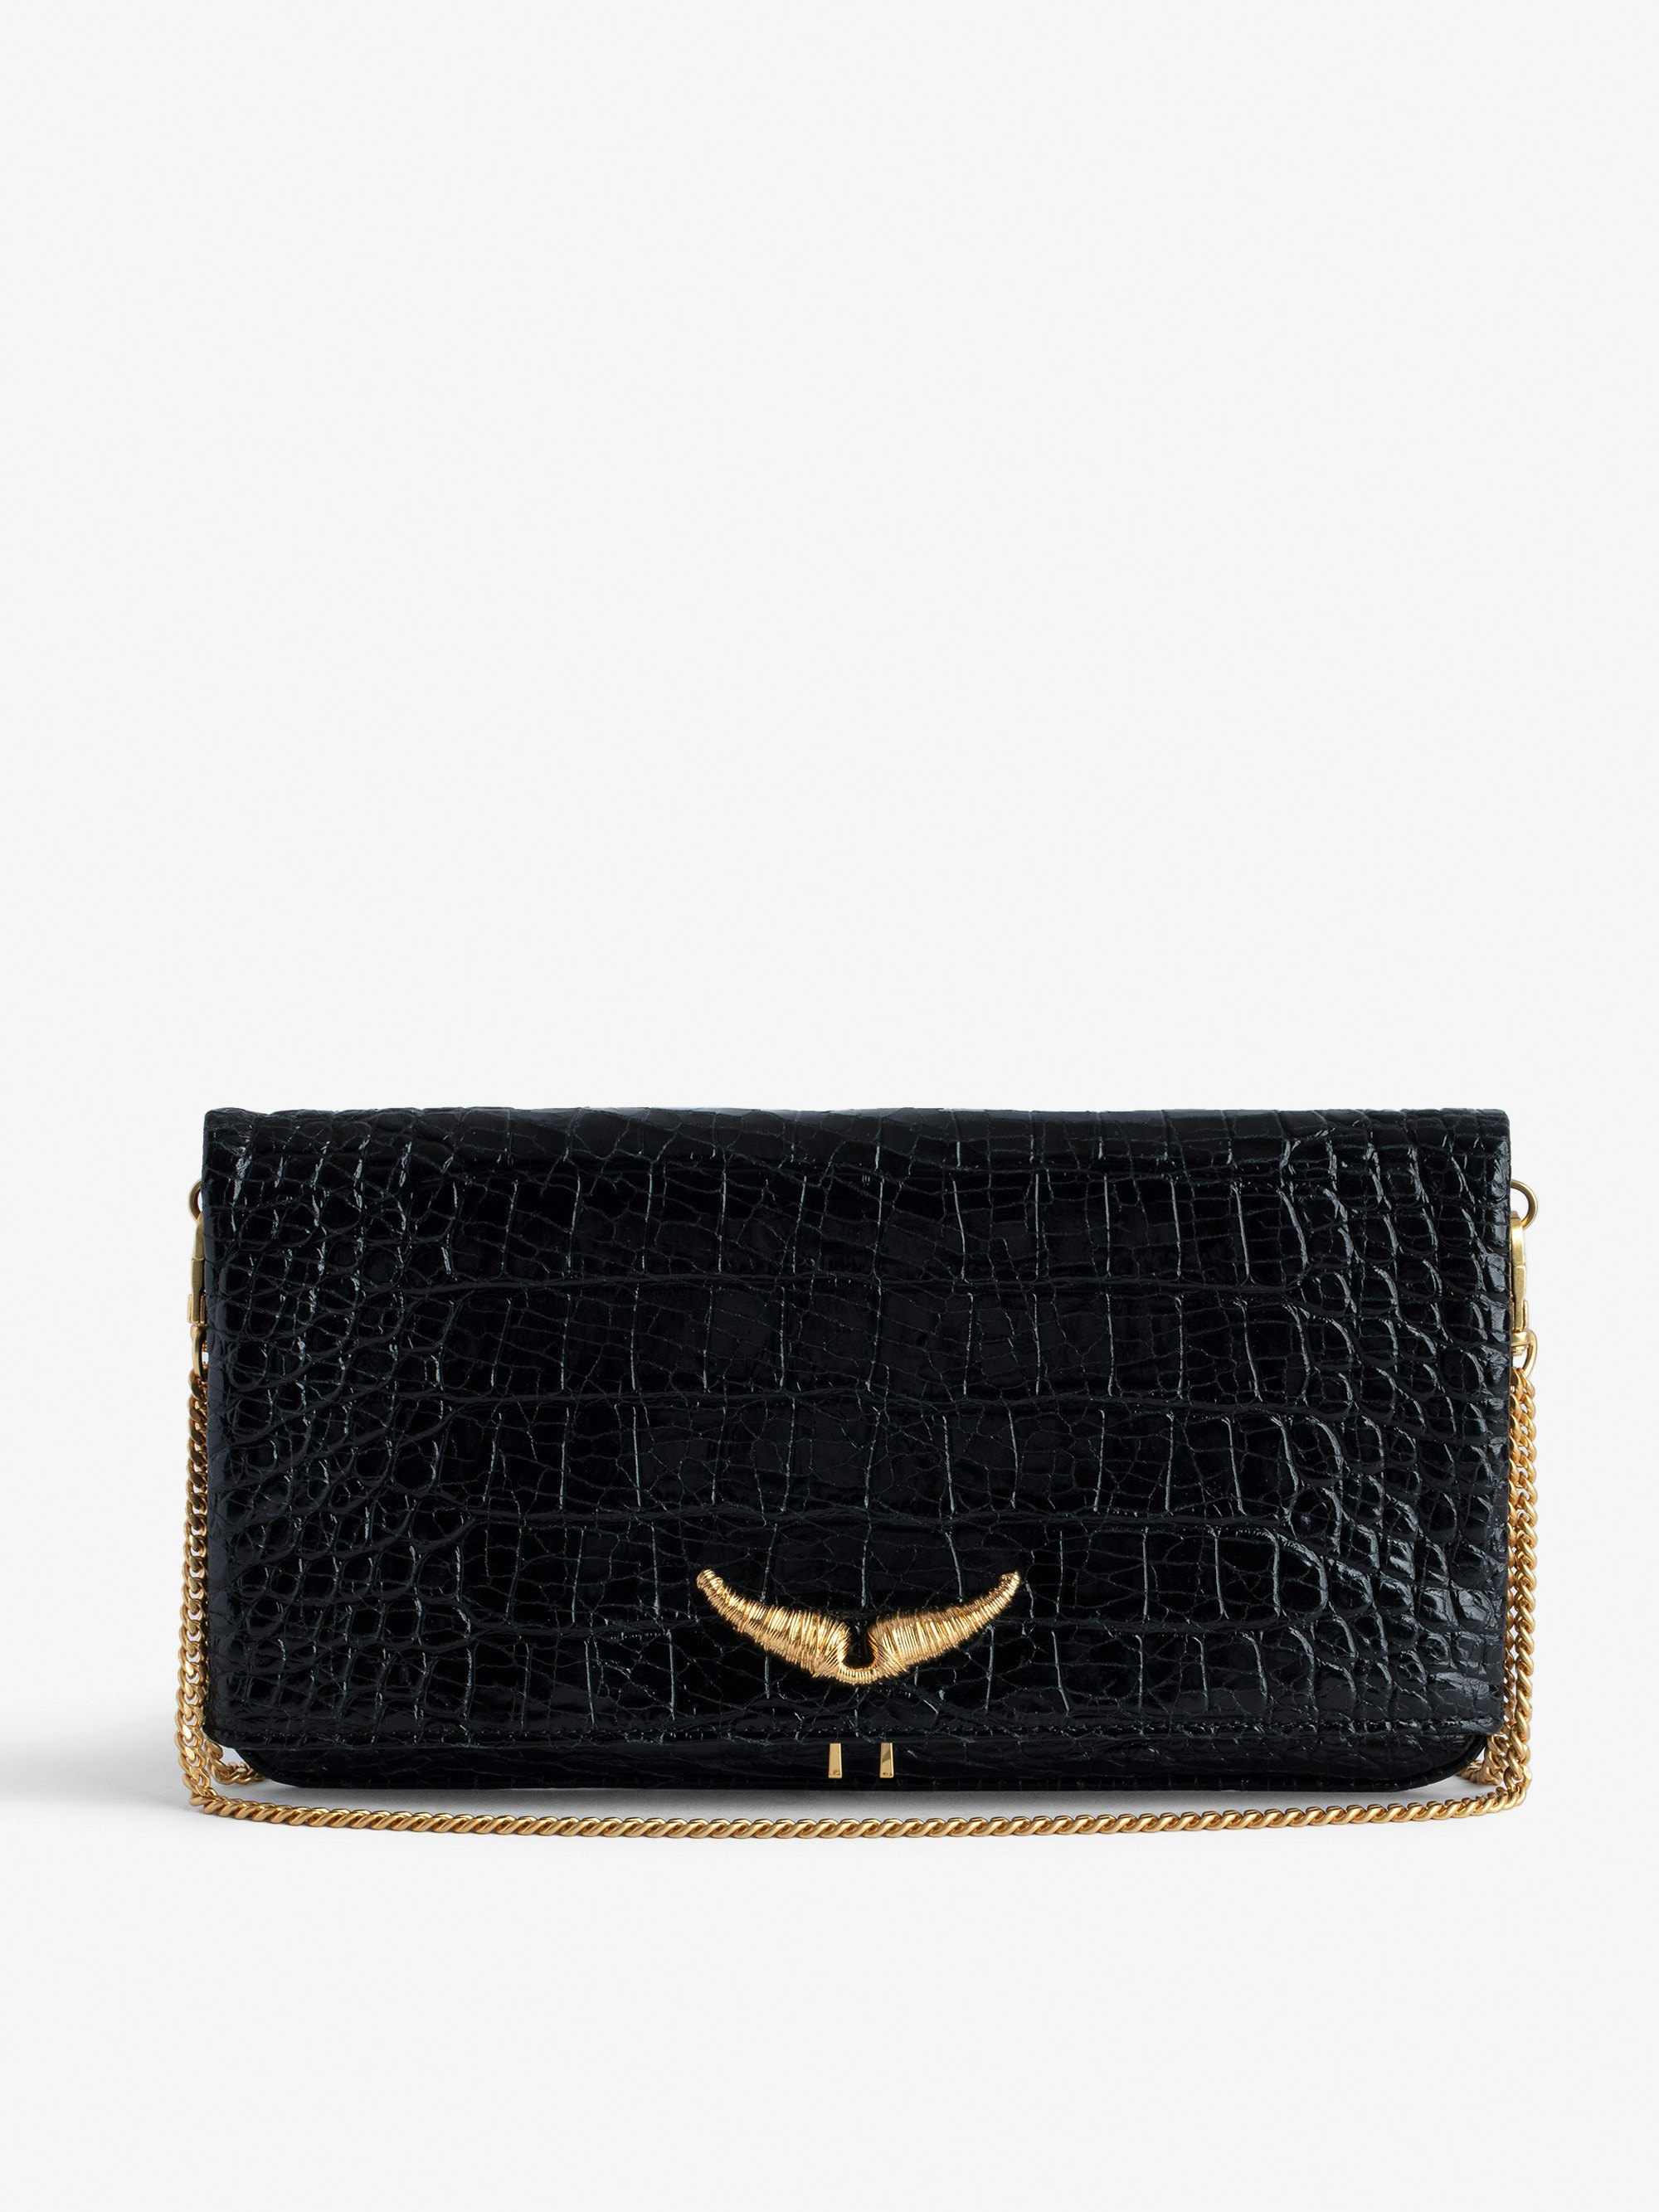  Goossens Rock Embossed Clutch - Rock black croc-embossed leather clutch with gold-tone metal chain.